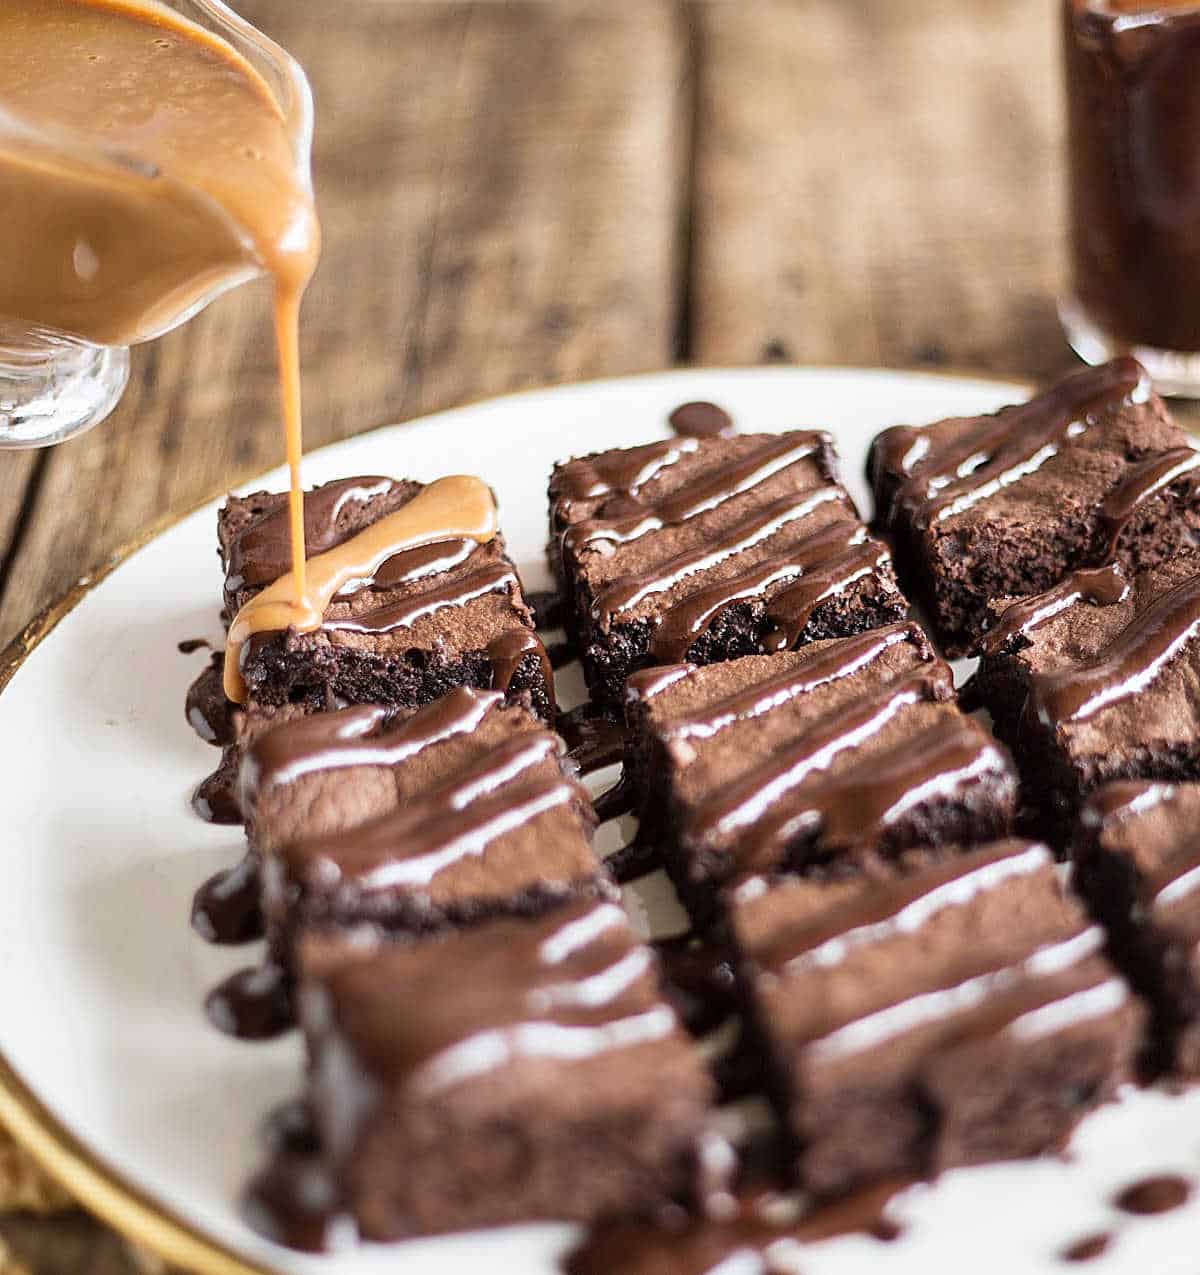 Pouring dulce de leche sauce from jar onto brownie squares with chocolate sauce on white plate.